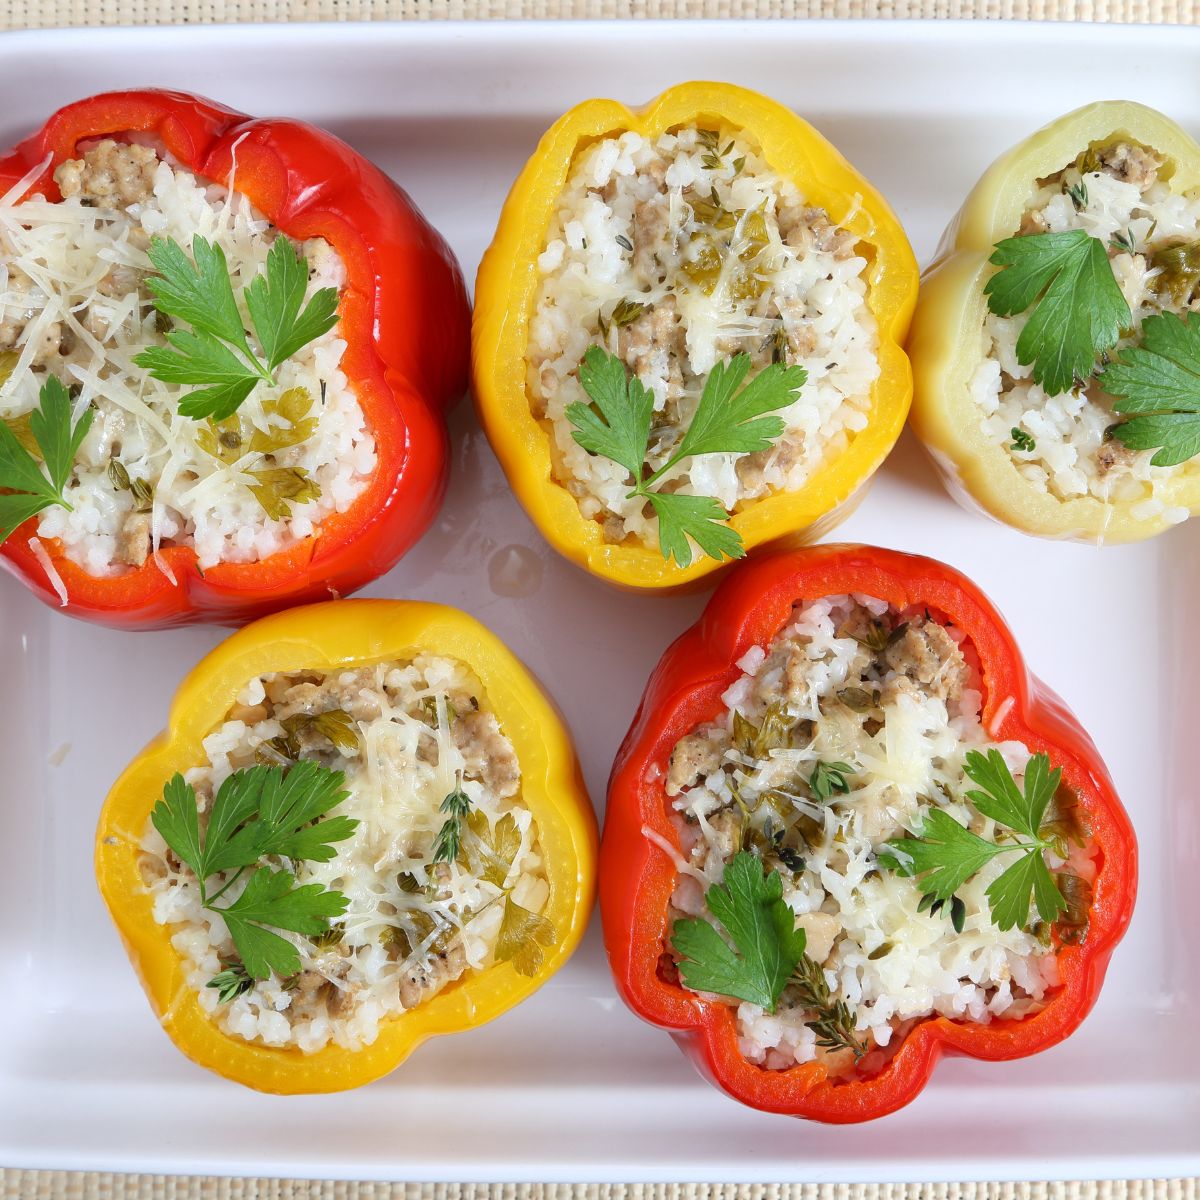 Stuffed Peppers Recipe Step 3 - fill peppers and place in 9x13 baking dish